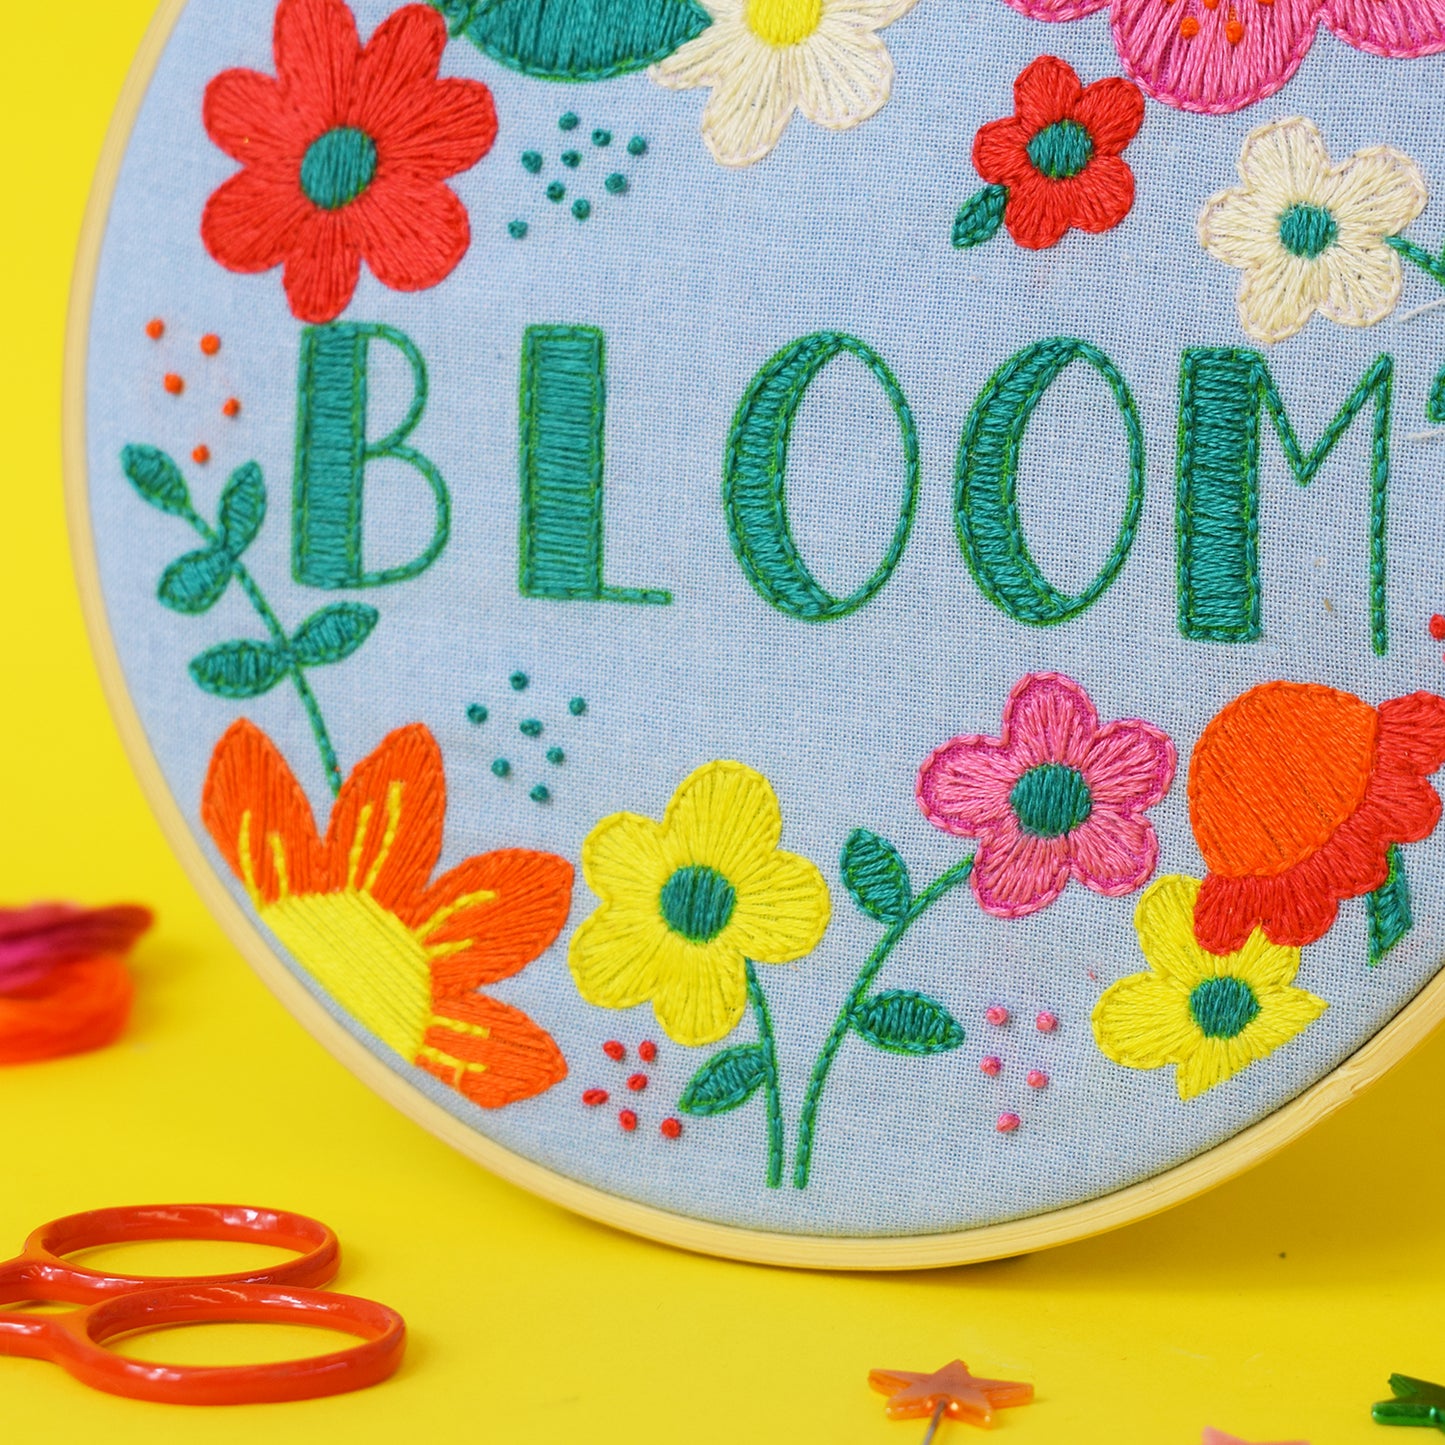 'Bloom' Large Embroidery Craft Kit